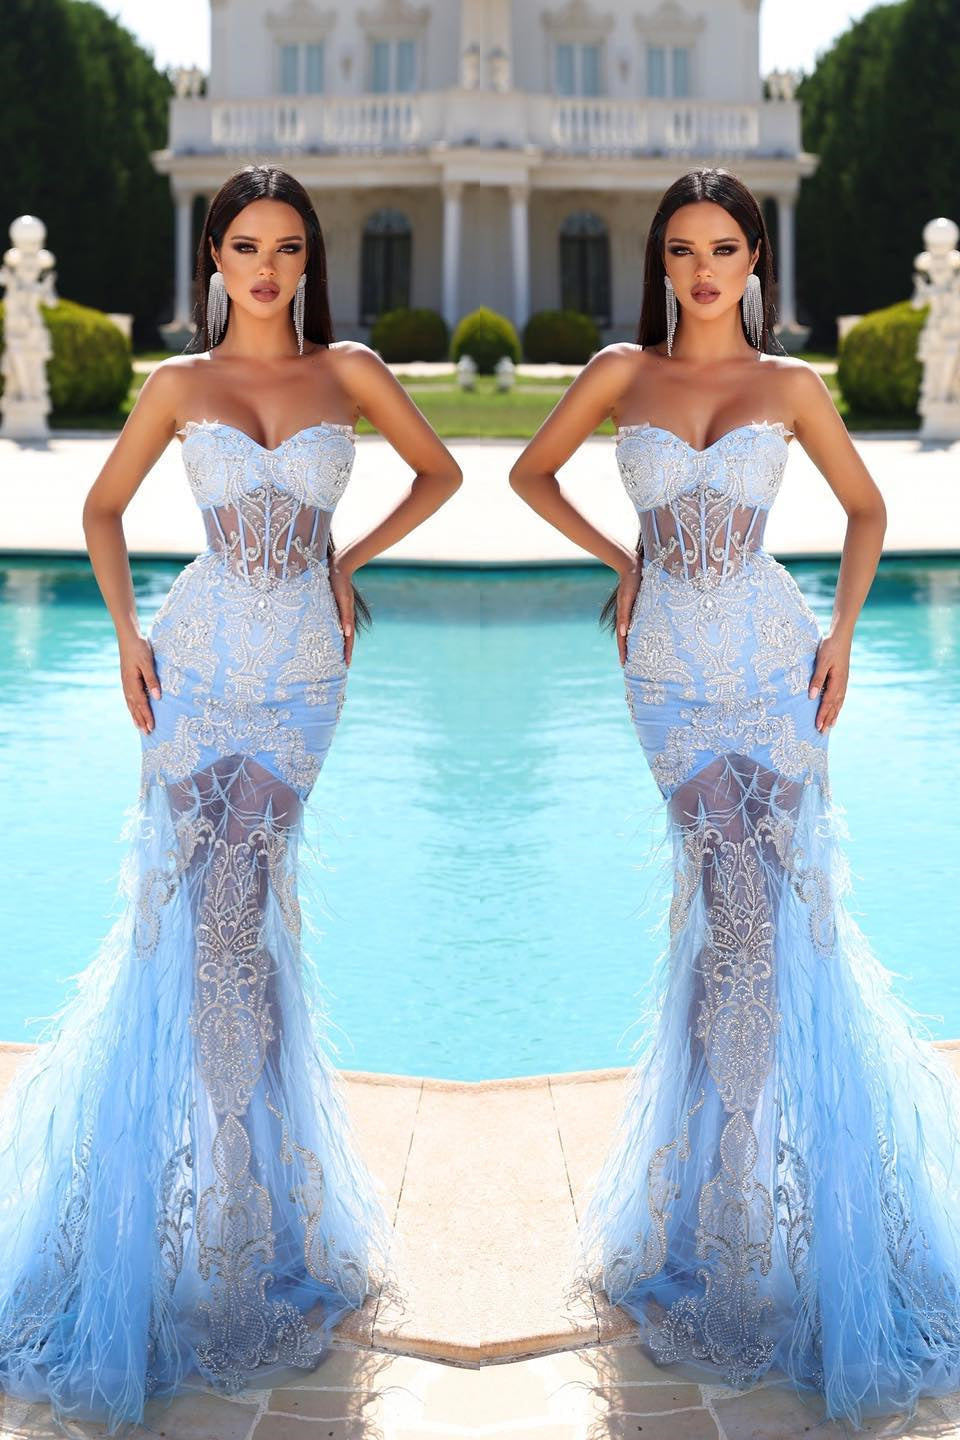 Elegant Sky Blue Sweetheart Mermaid Prom Dress with Lace Appliques and Feathers-Occasion Dress-BallBride